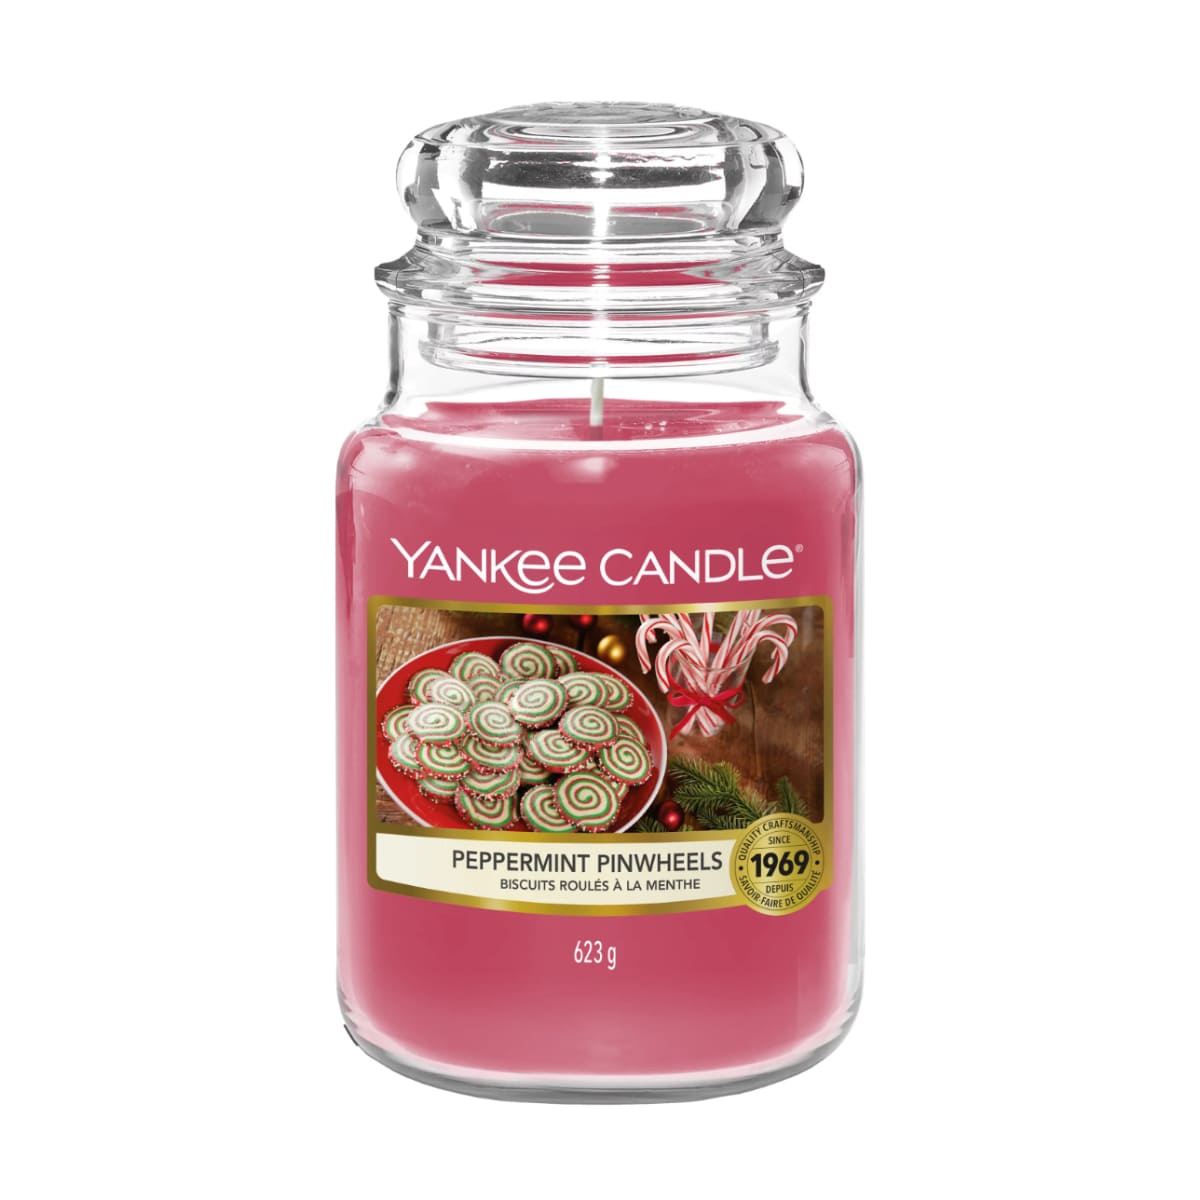 Peppermint Pinwheels Yankee Candle Candle